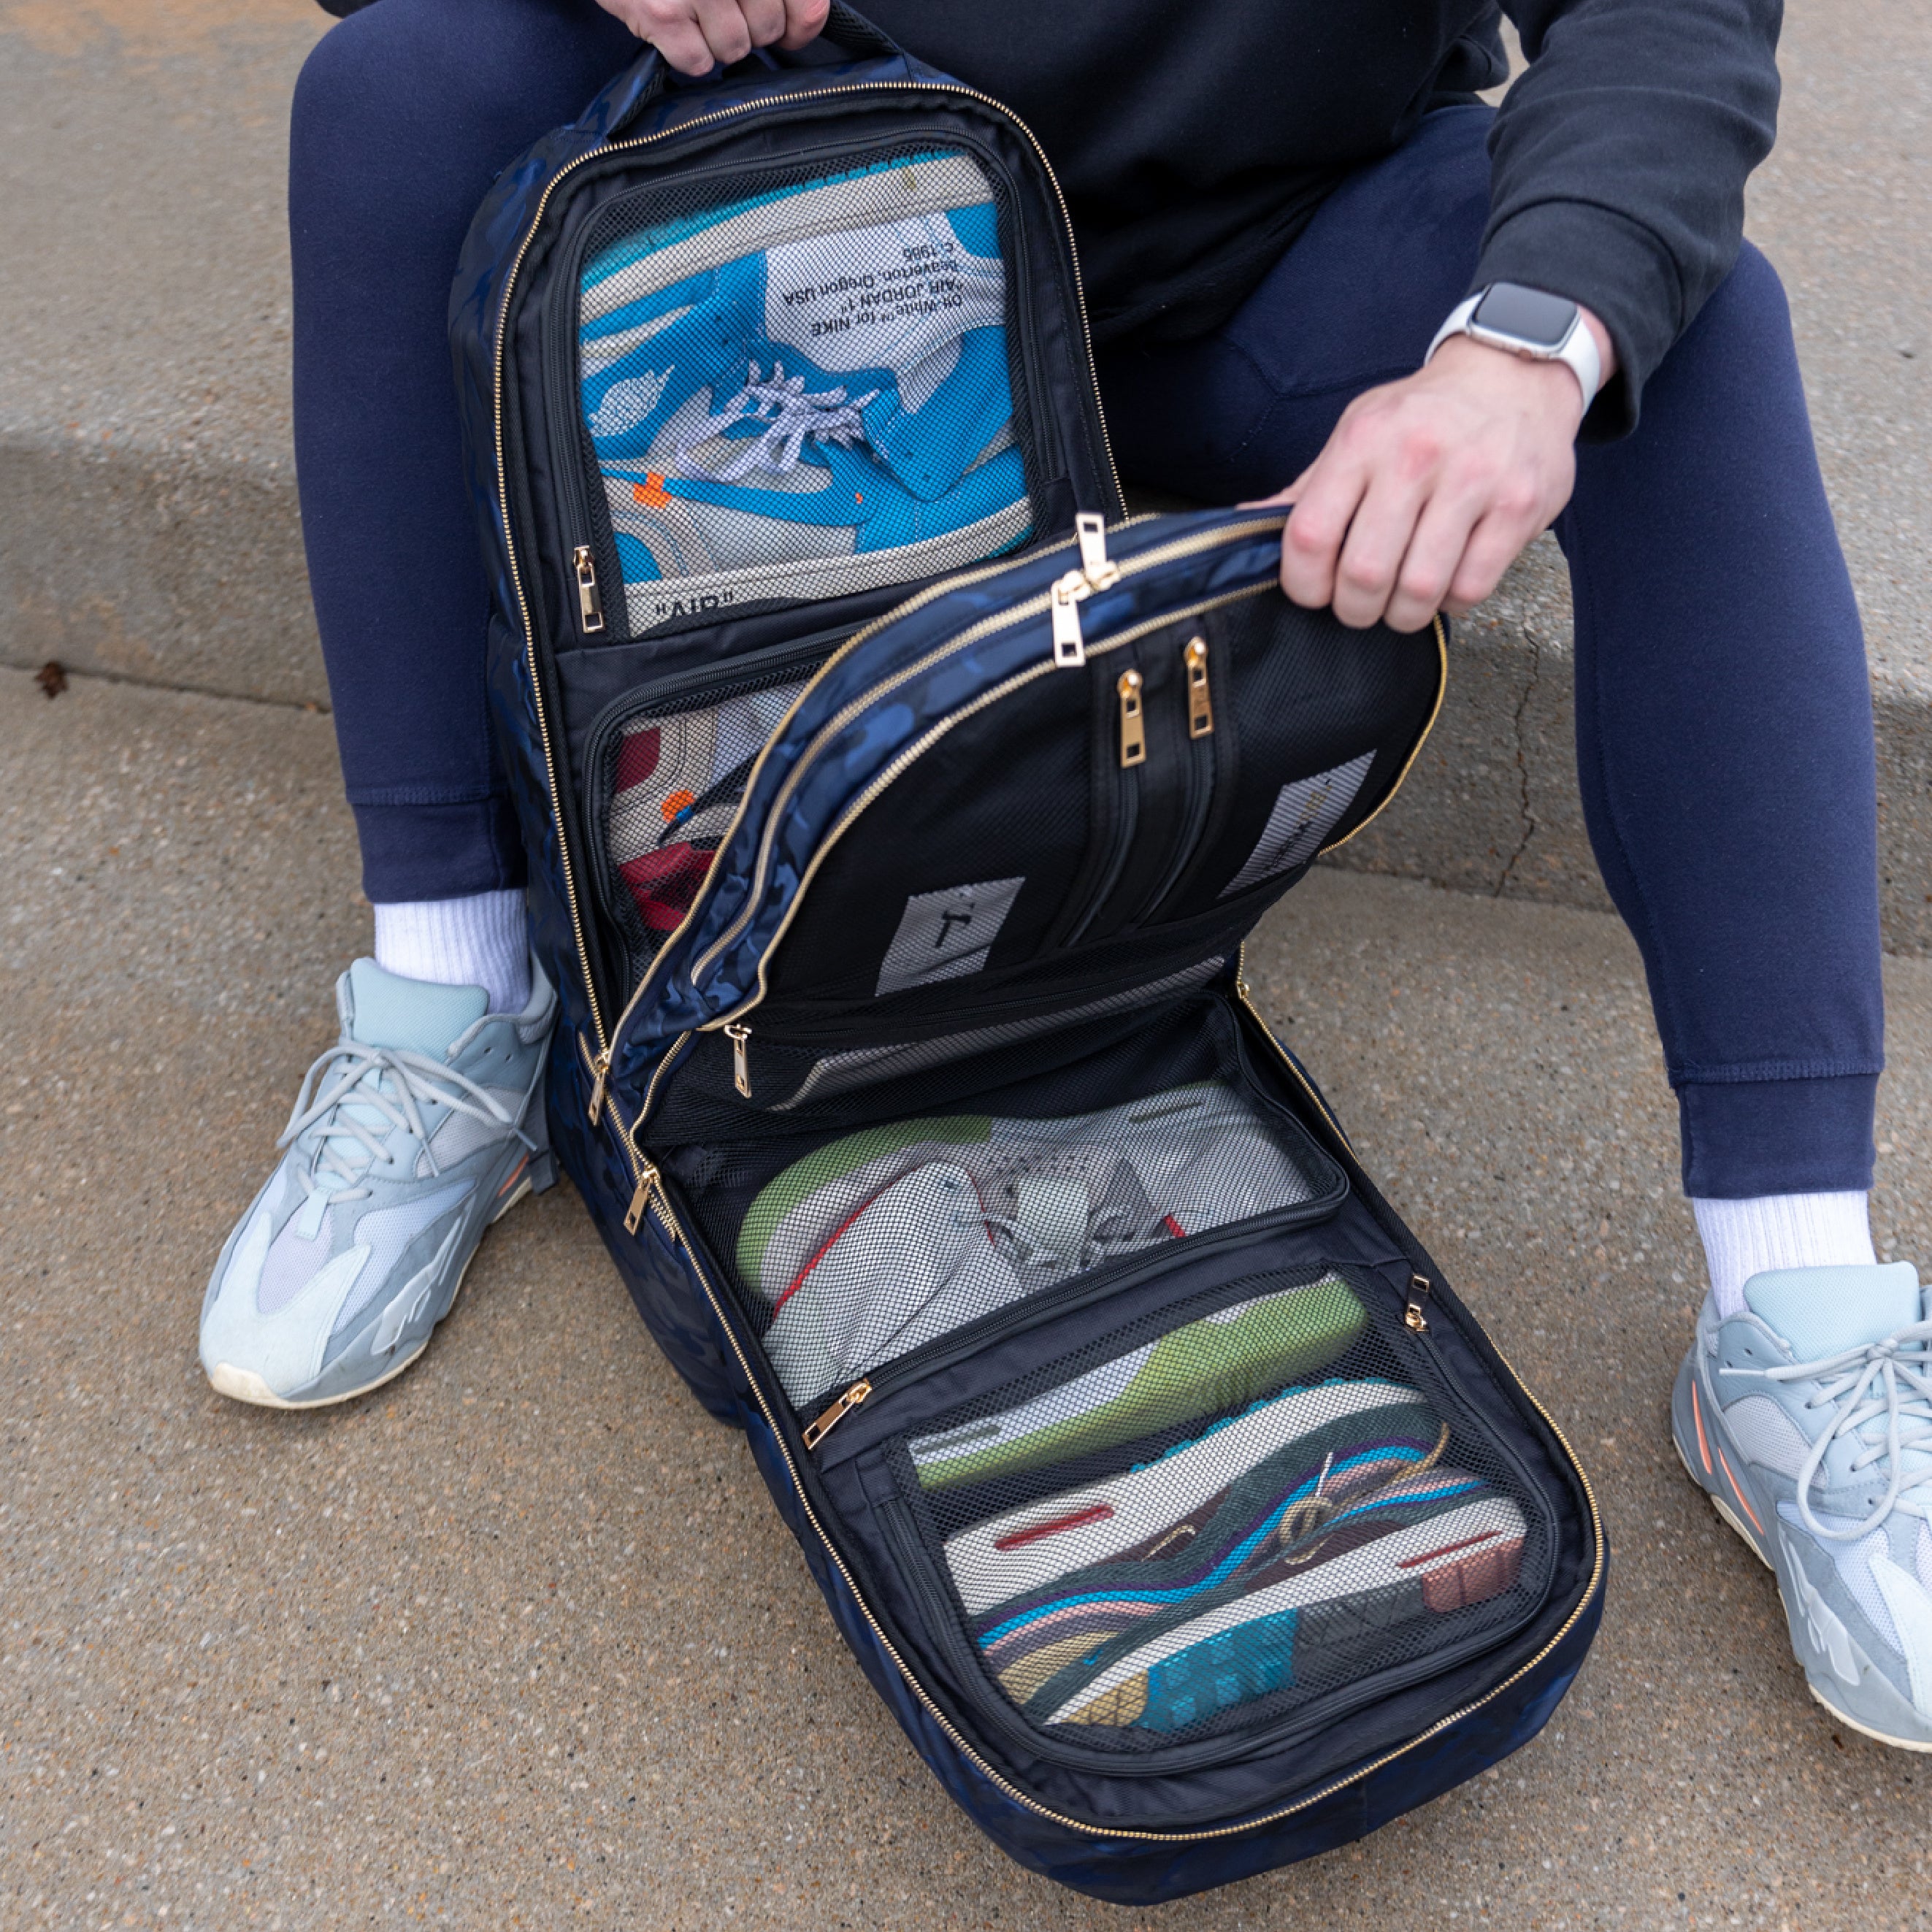 Sneaker Travel Bag - Carry On Backpack for Shoes and Clothes